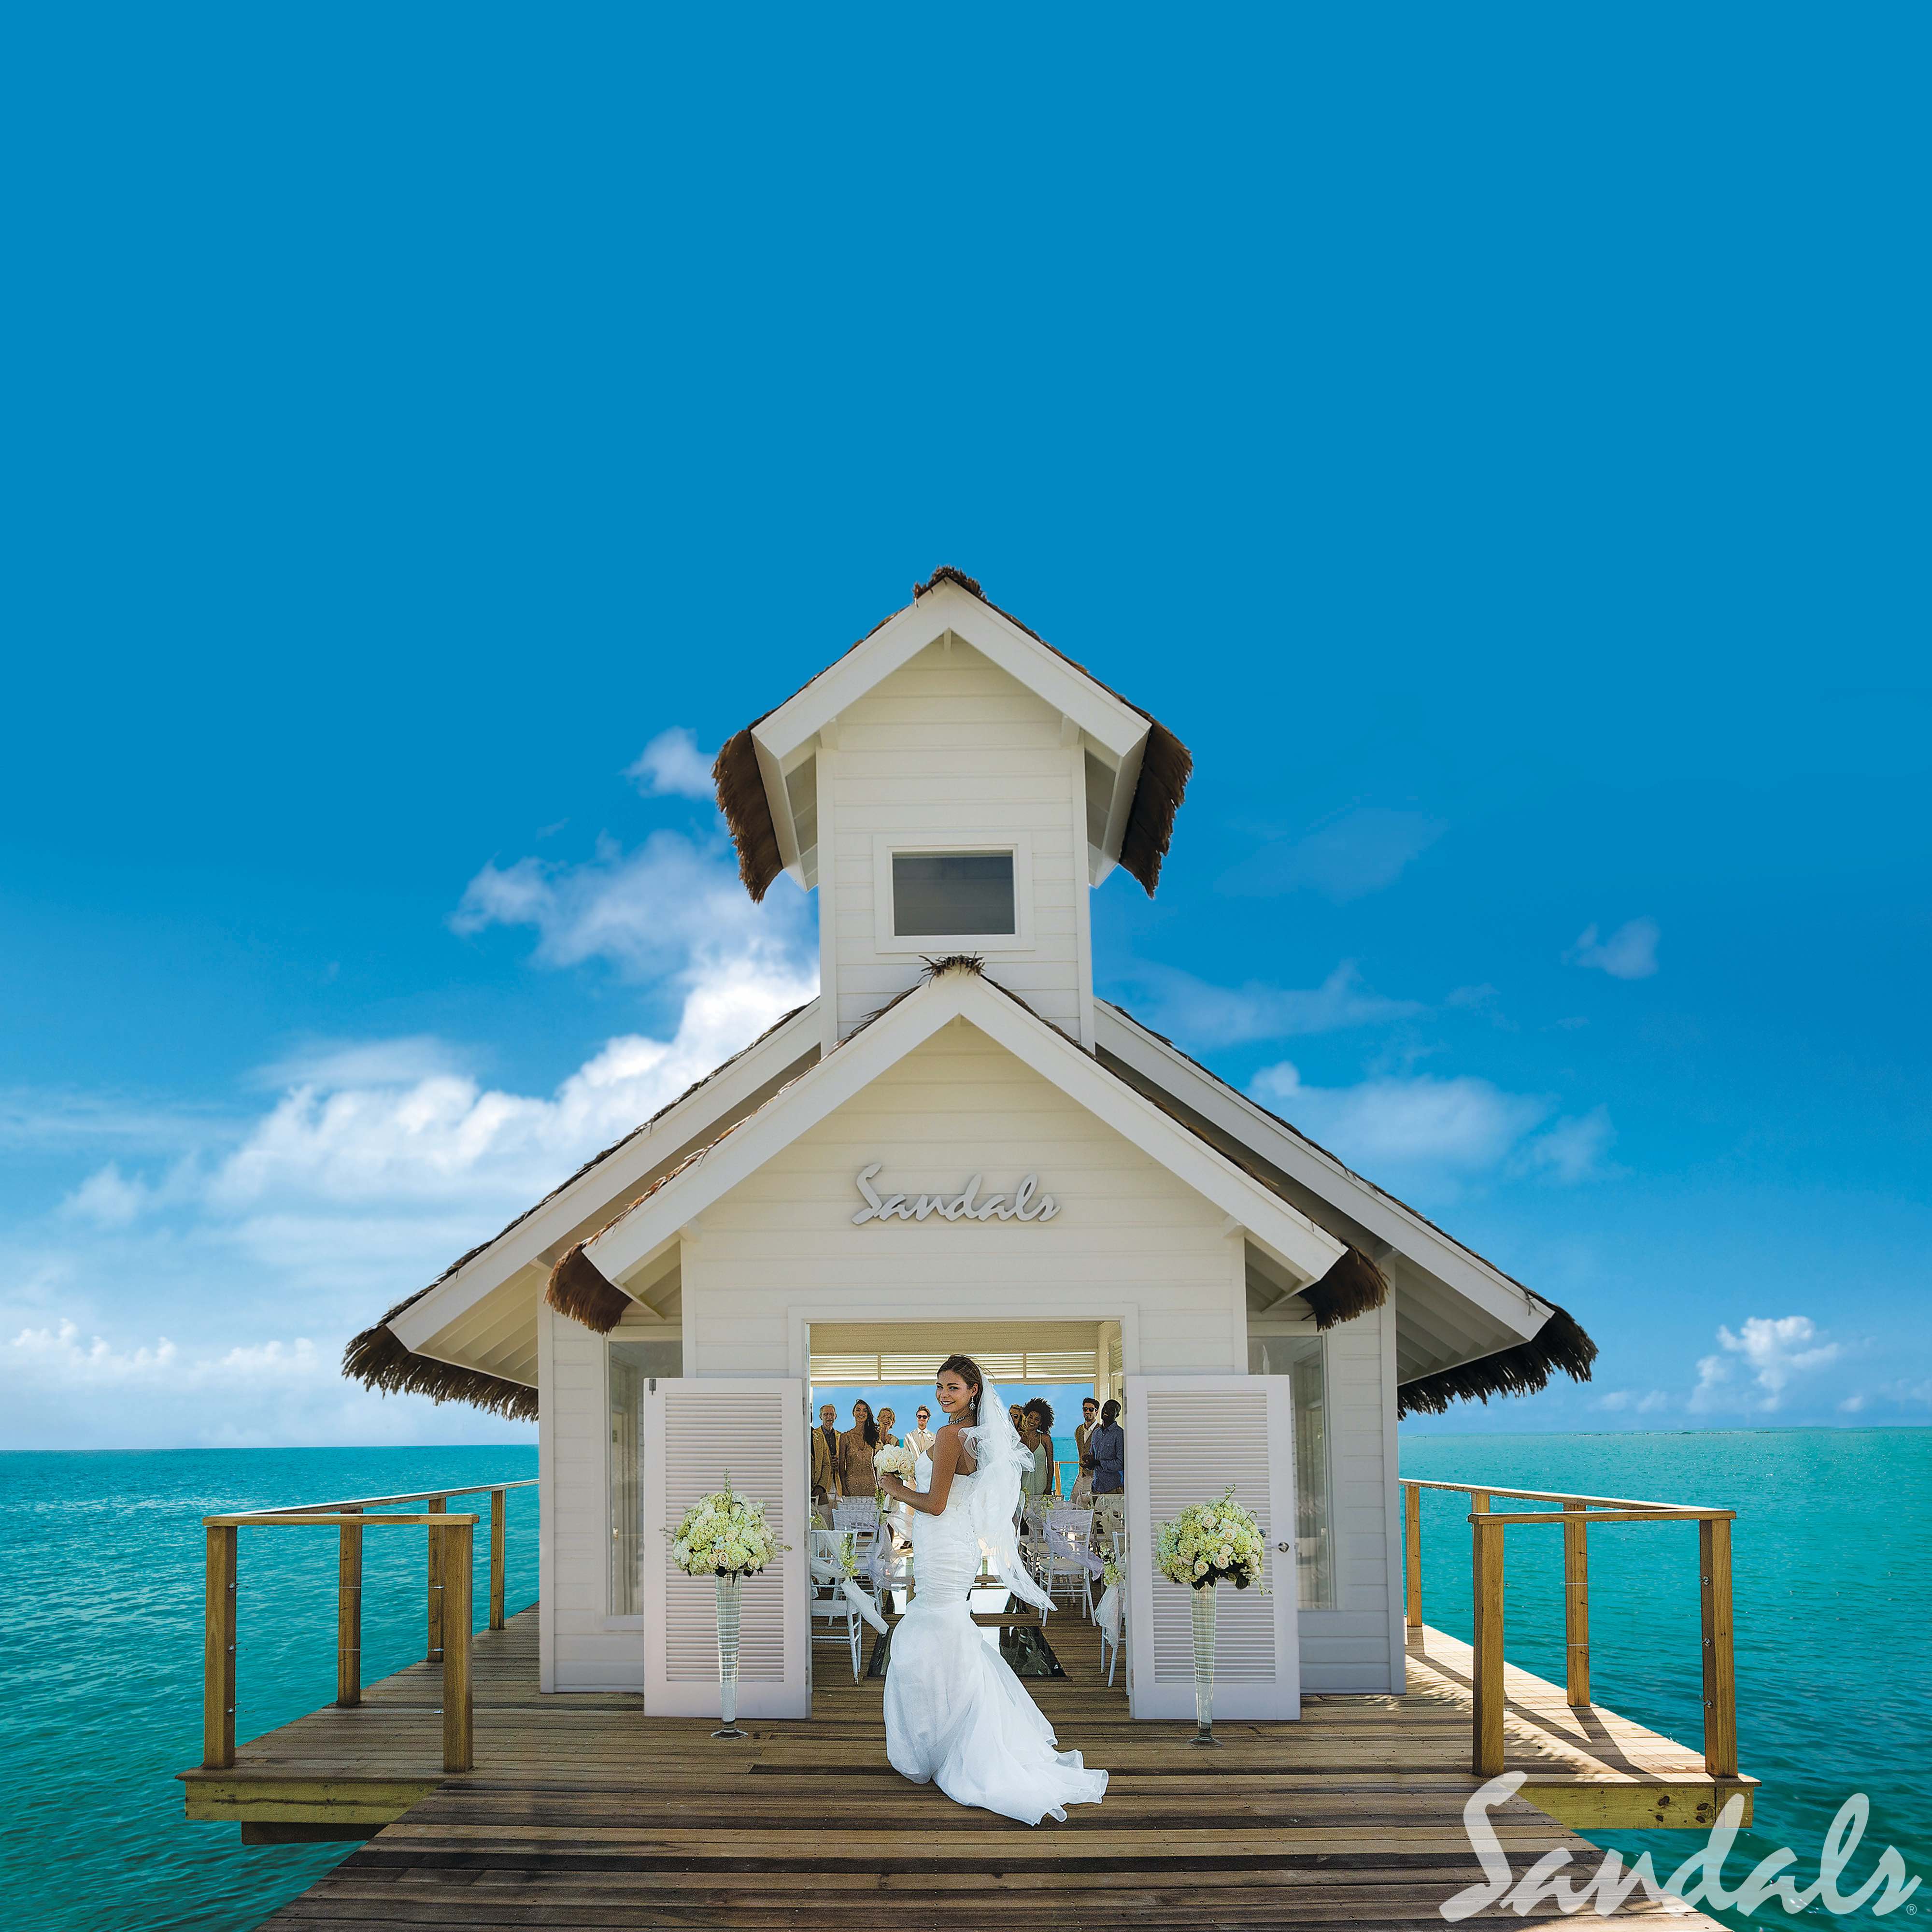 Photo by @sandalsresorts, courtesy of Molly’s Caribbean